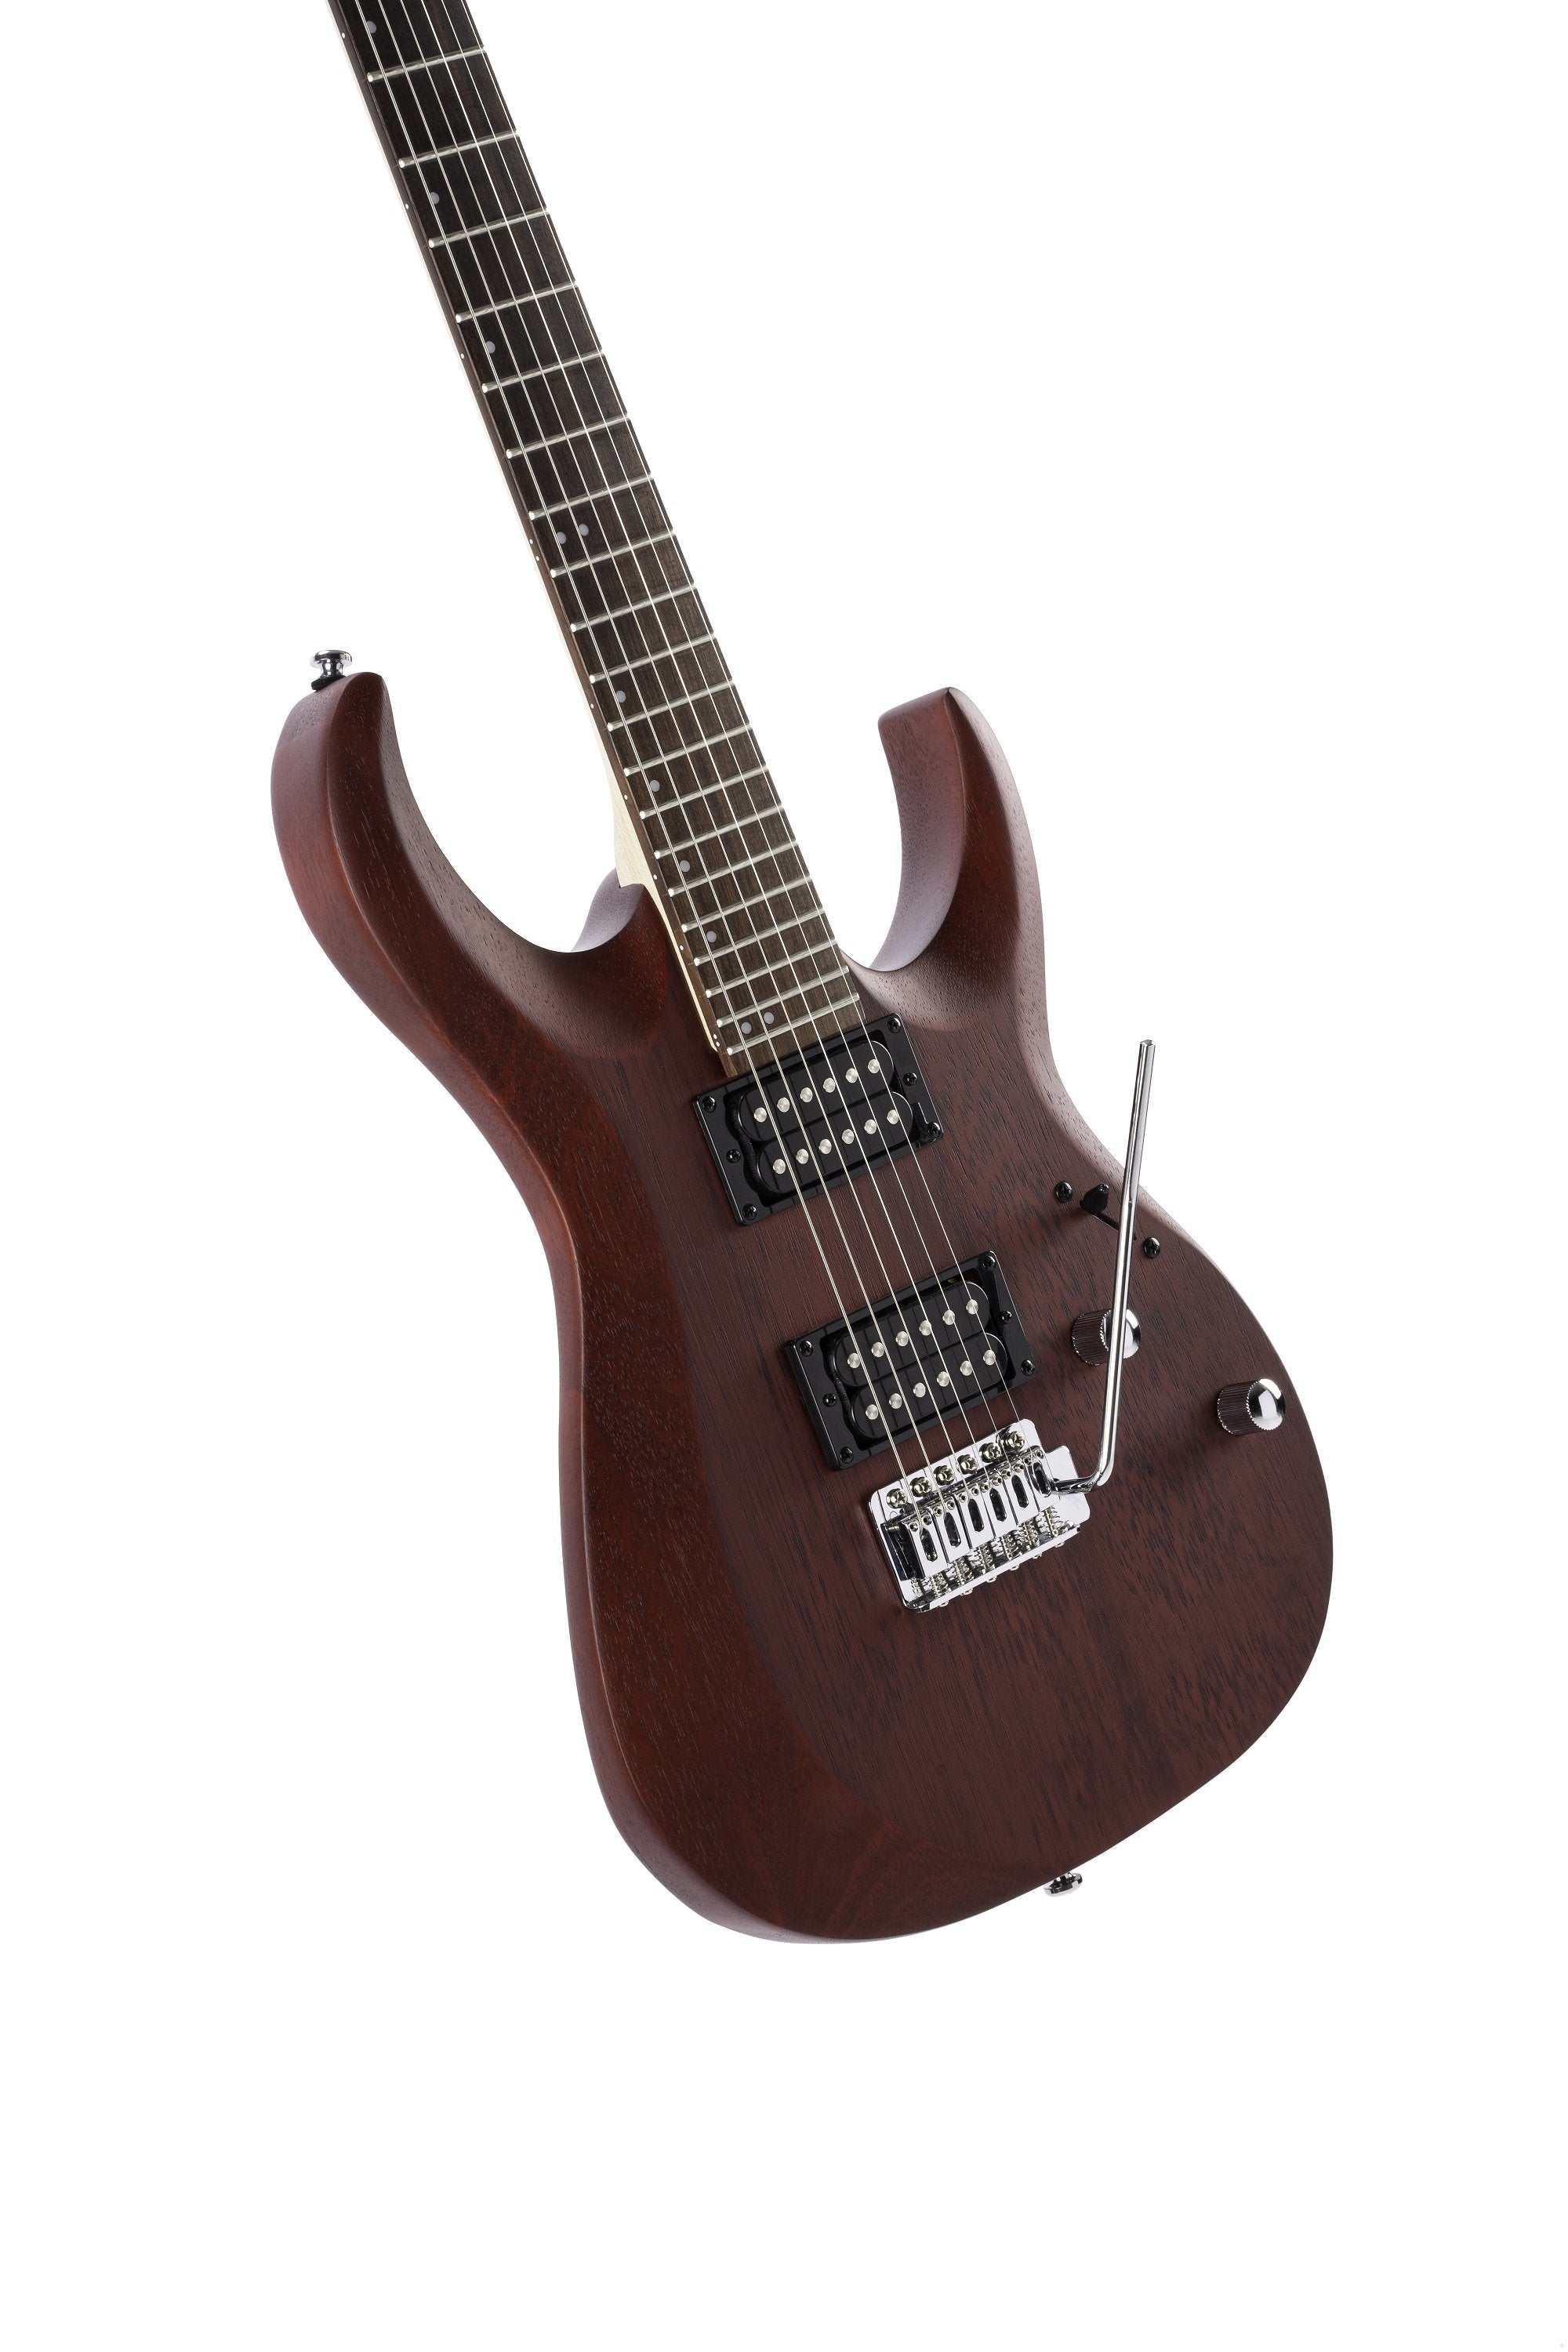 Cort X100 Open Pore Black Cherry, Electric Guitar for sale at Richards Guitars.